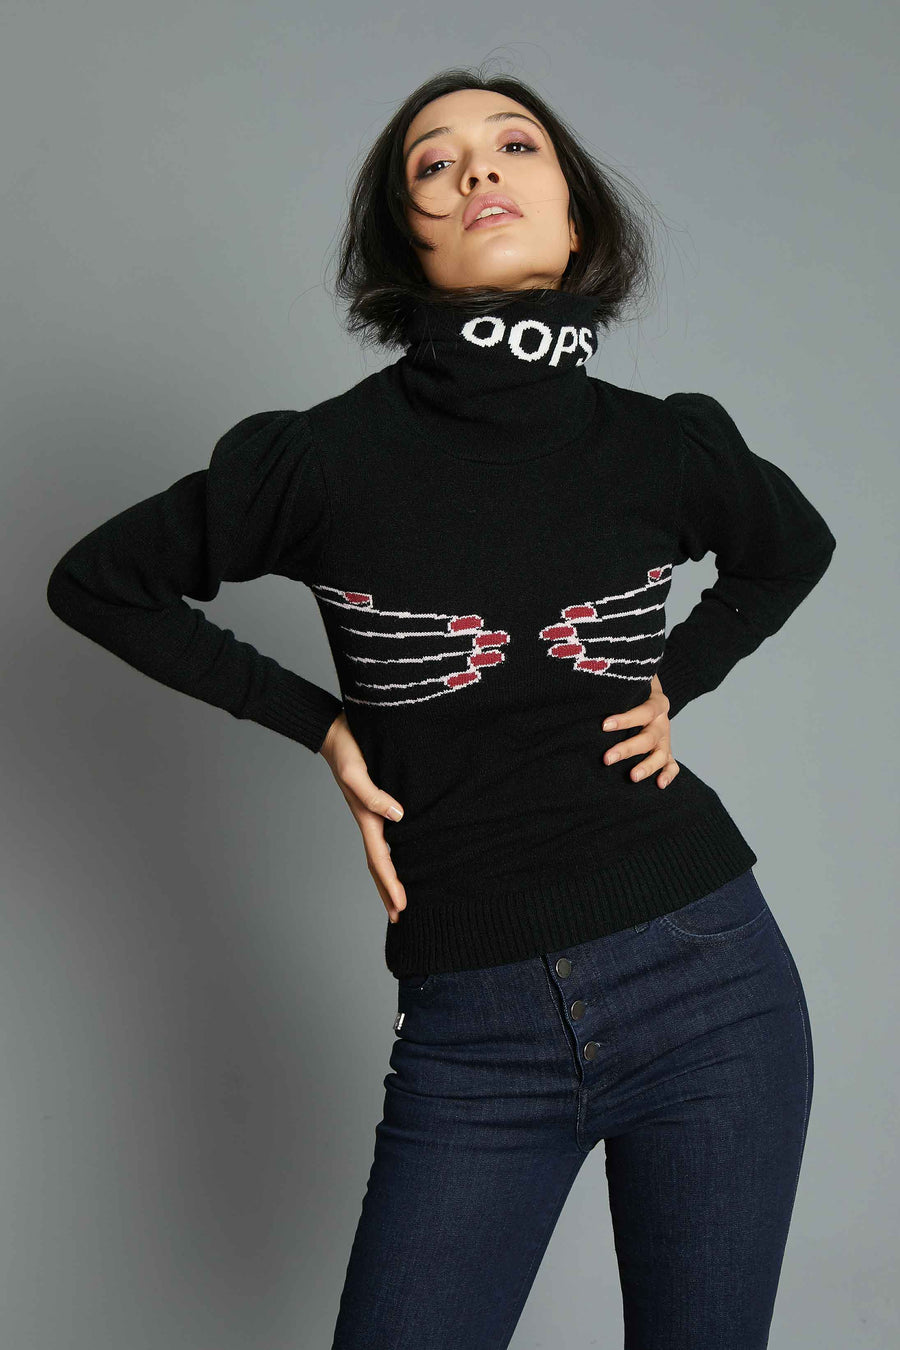 SLIM FIT SWEATER WITH BLACK INTARSIA HANDS